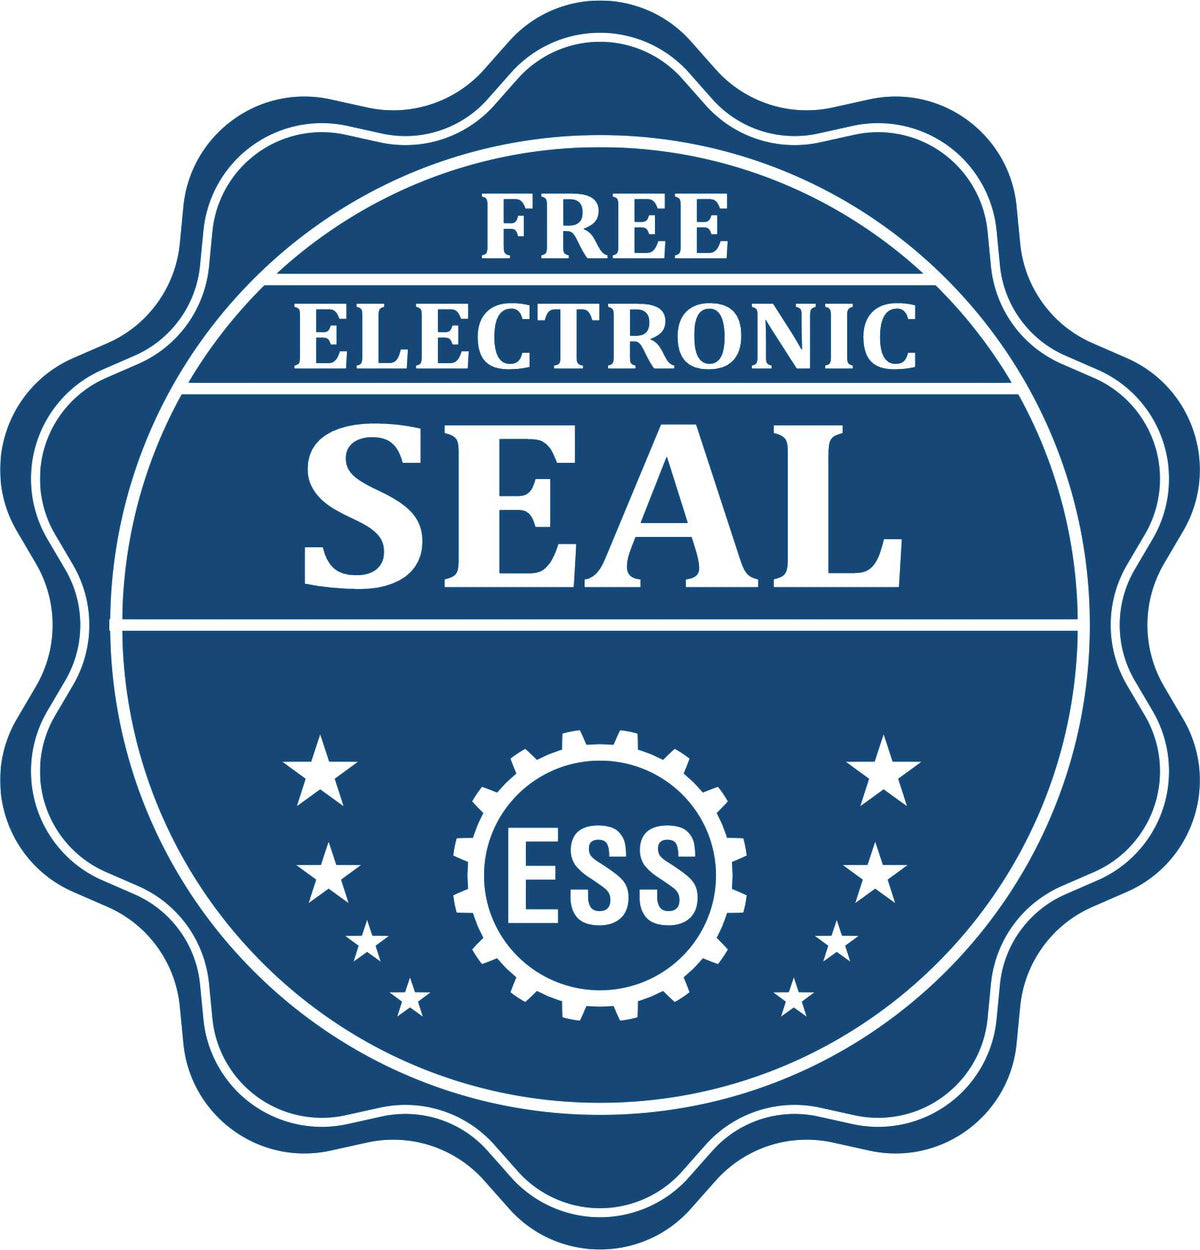 A badge showing a free electronic seal for the Slim Pre-Inked Texas Professional Geologist Seal Stamp with stars and the ESS gear on the emblem.